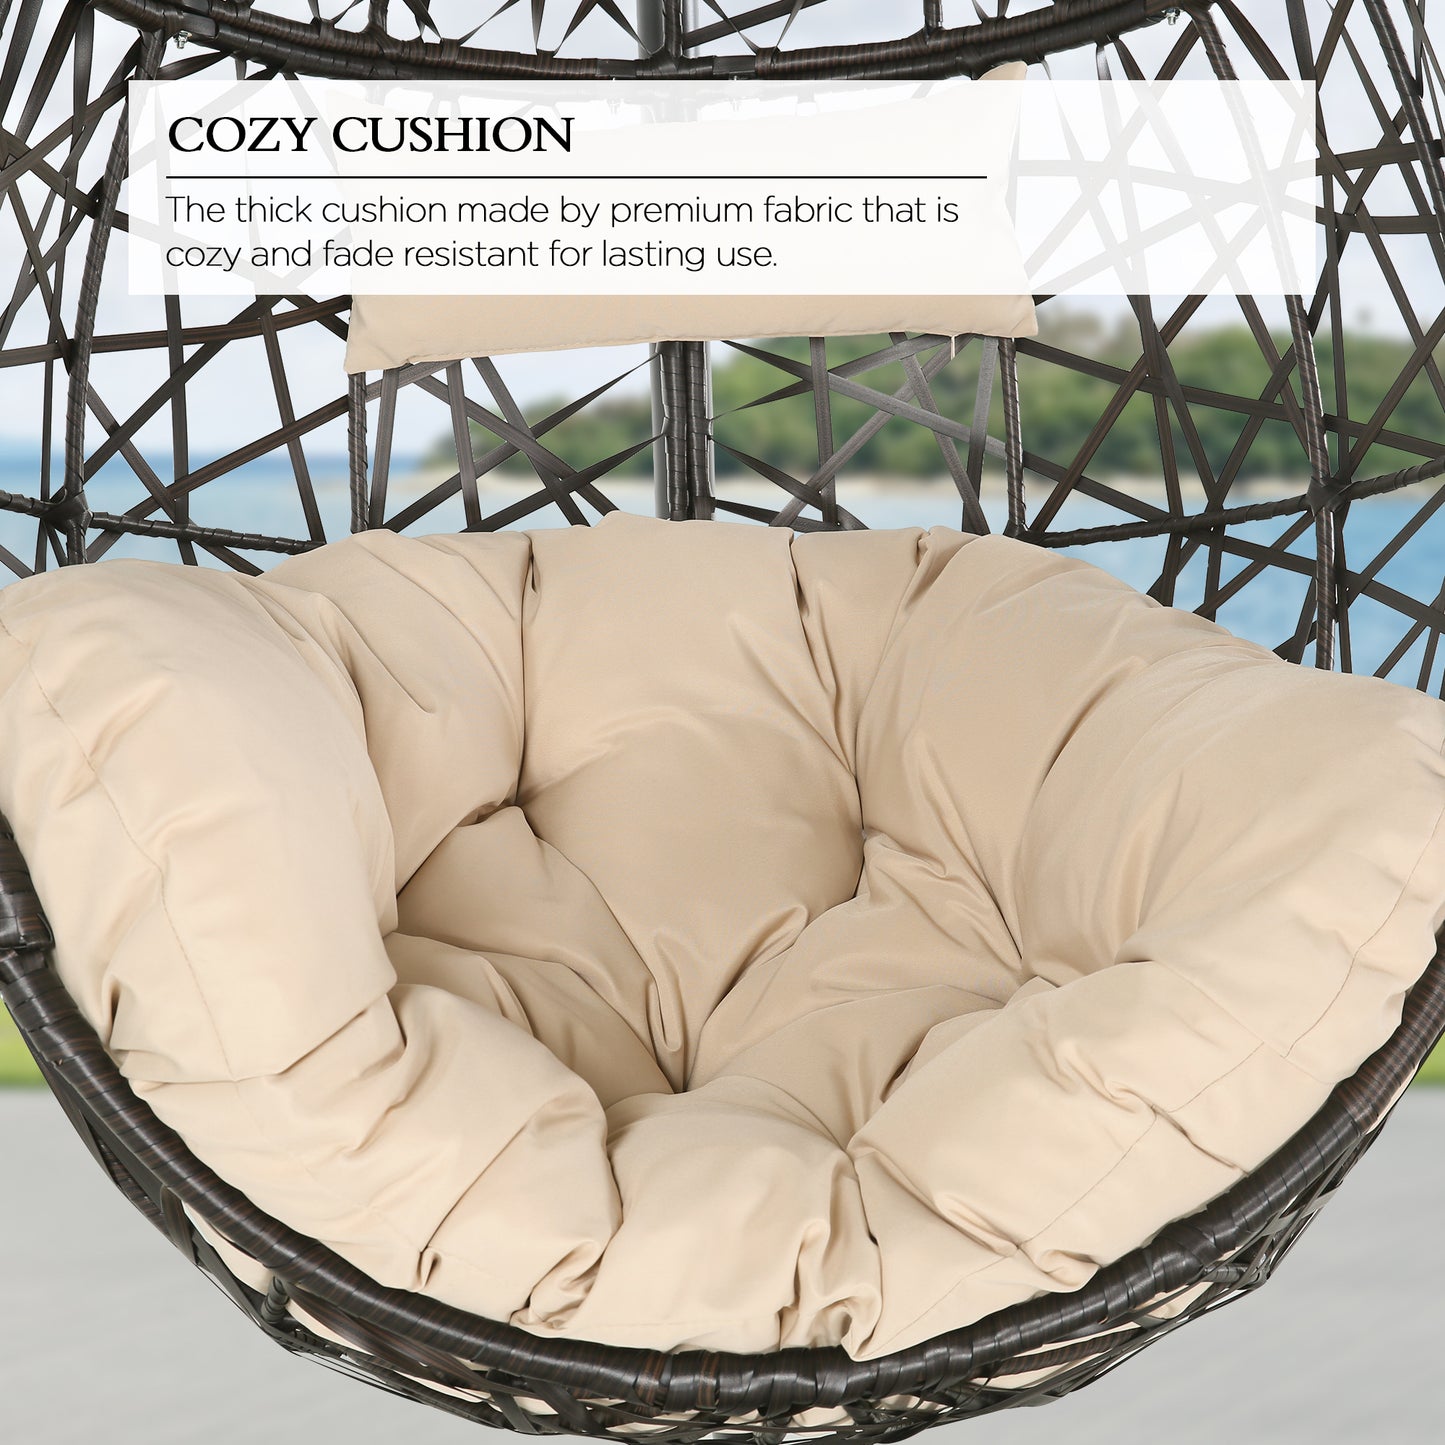 Patio Outdoor Indoor Rattan Hanging Basket Swing Chair with Stand and Cushion, Beige